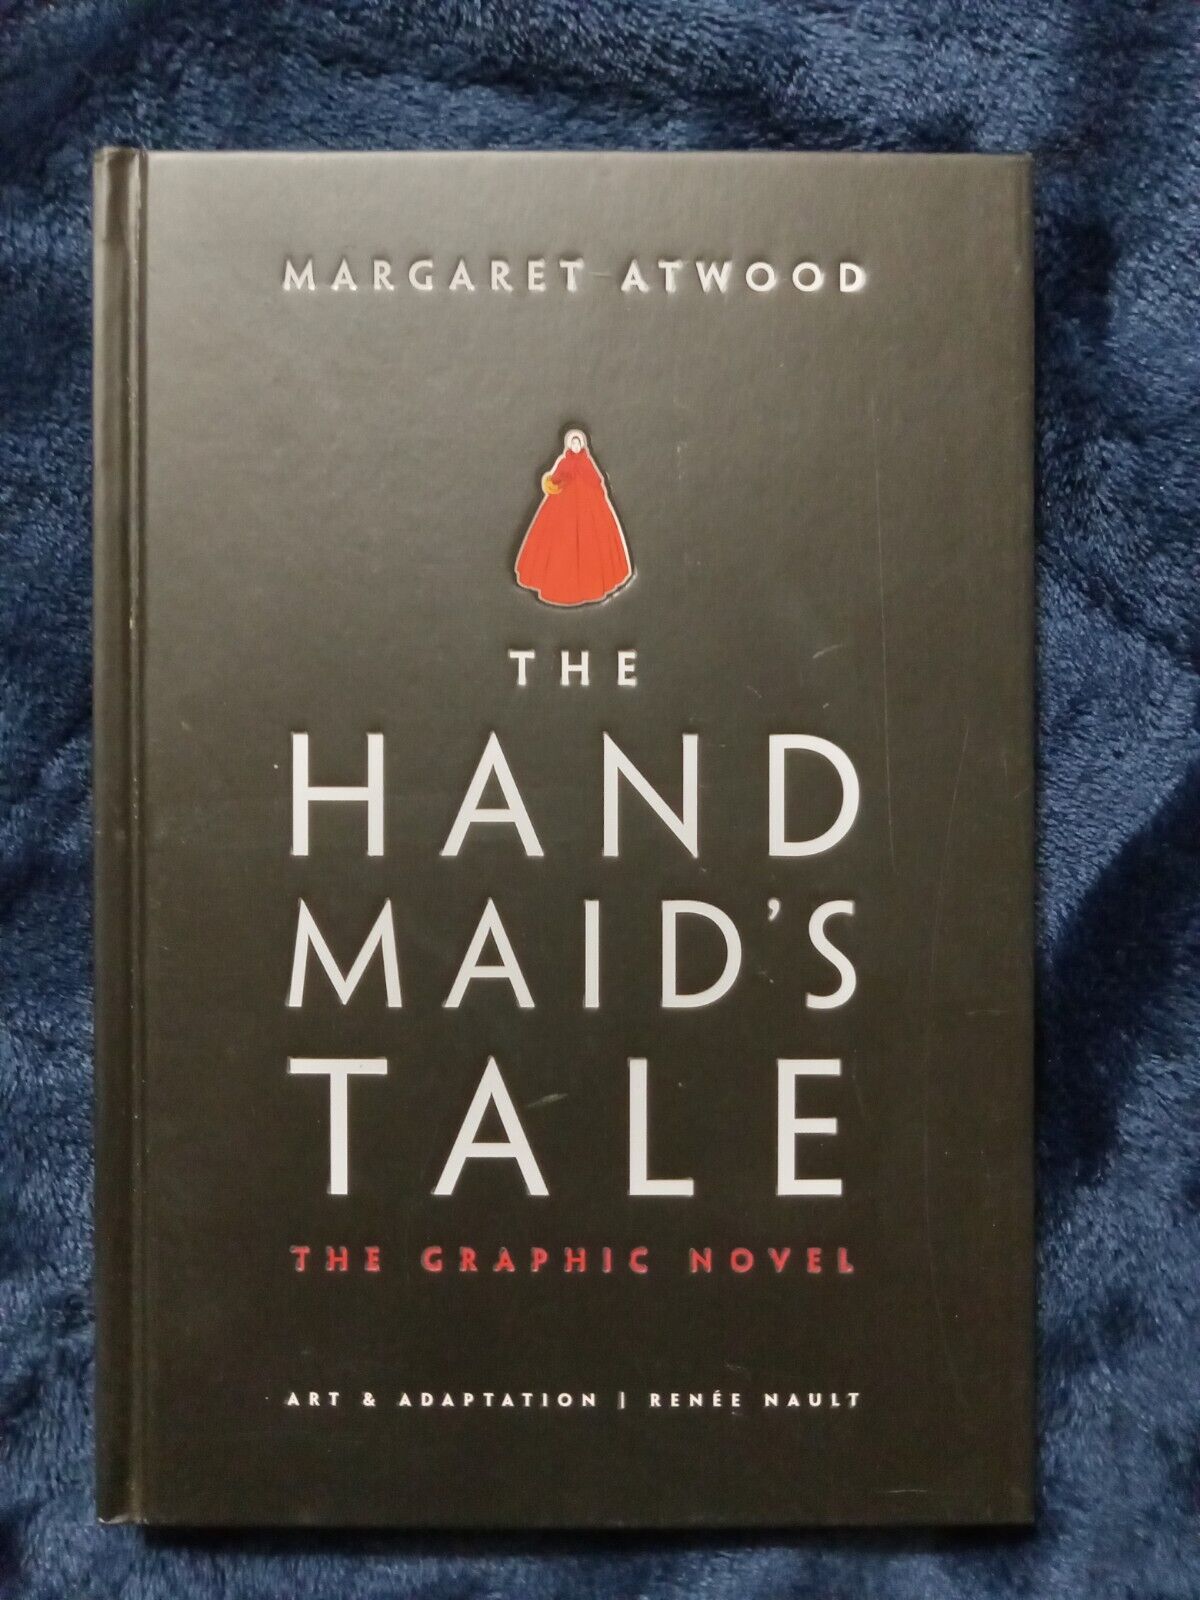 The Handmaid's Tale,The Graphic Novel By Margaret Atwood First Edition